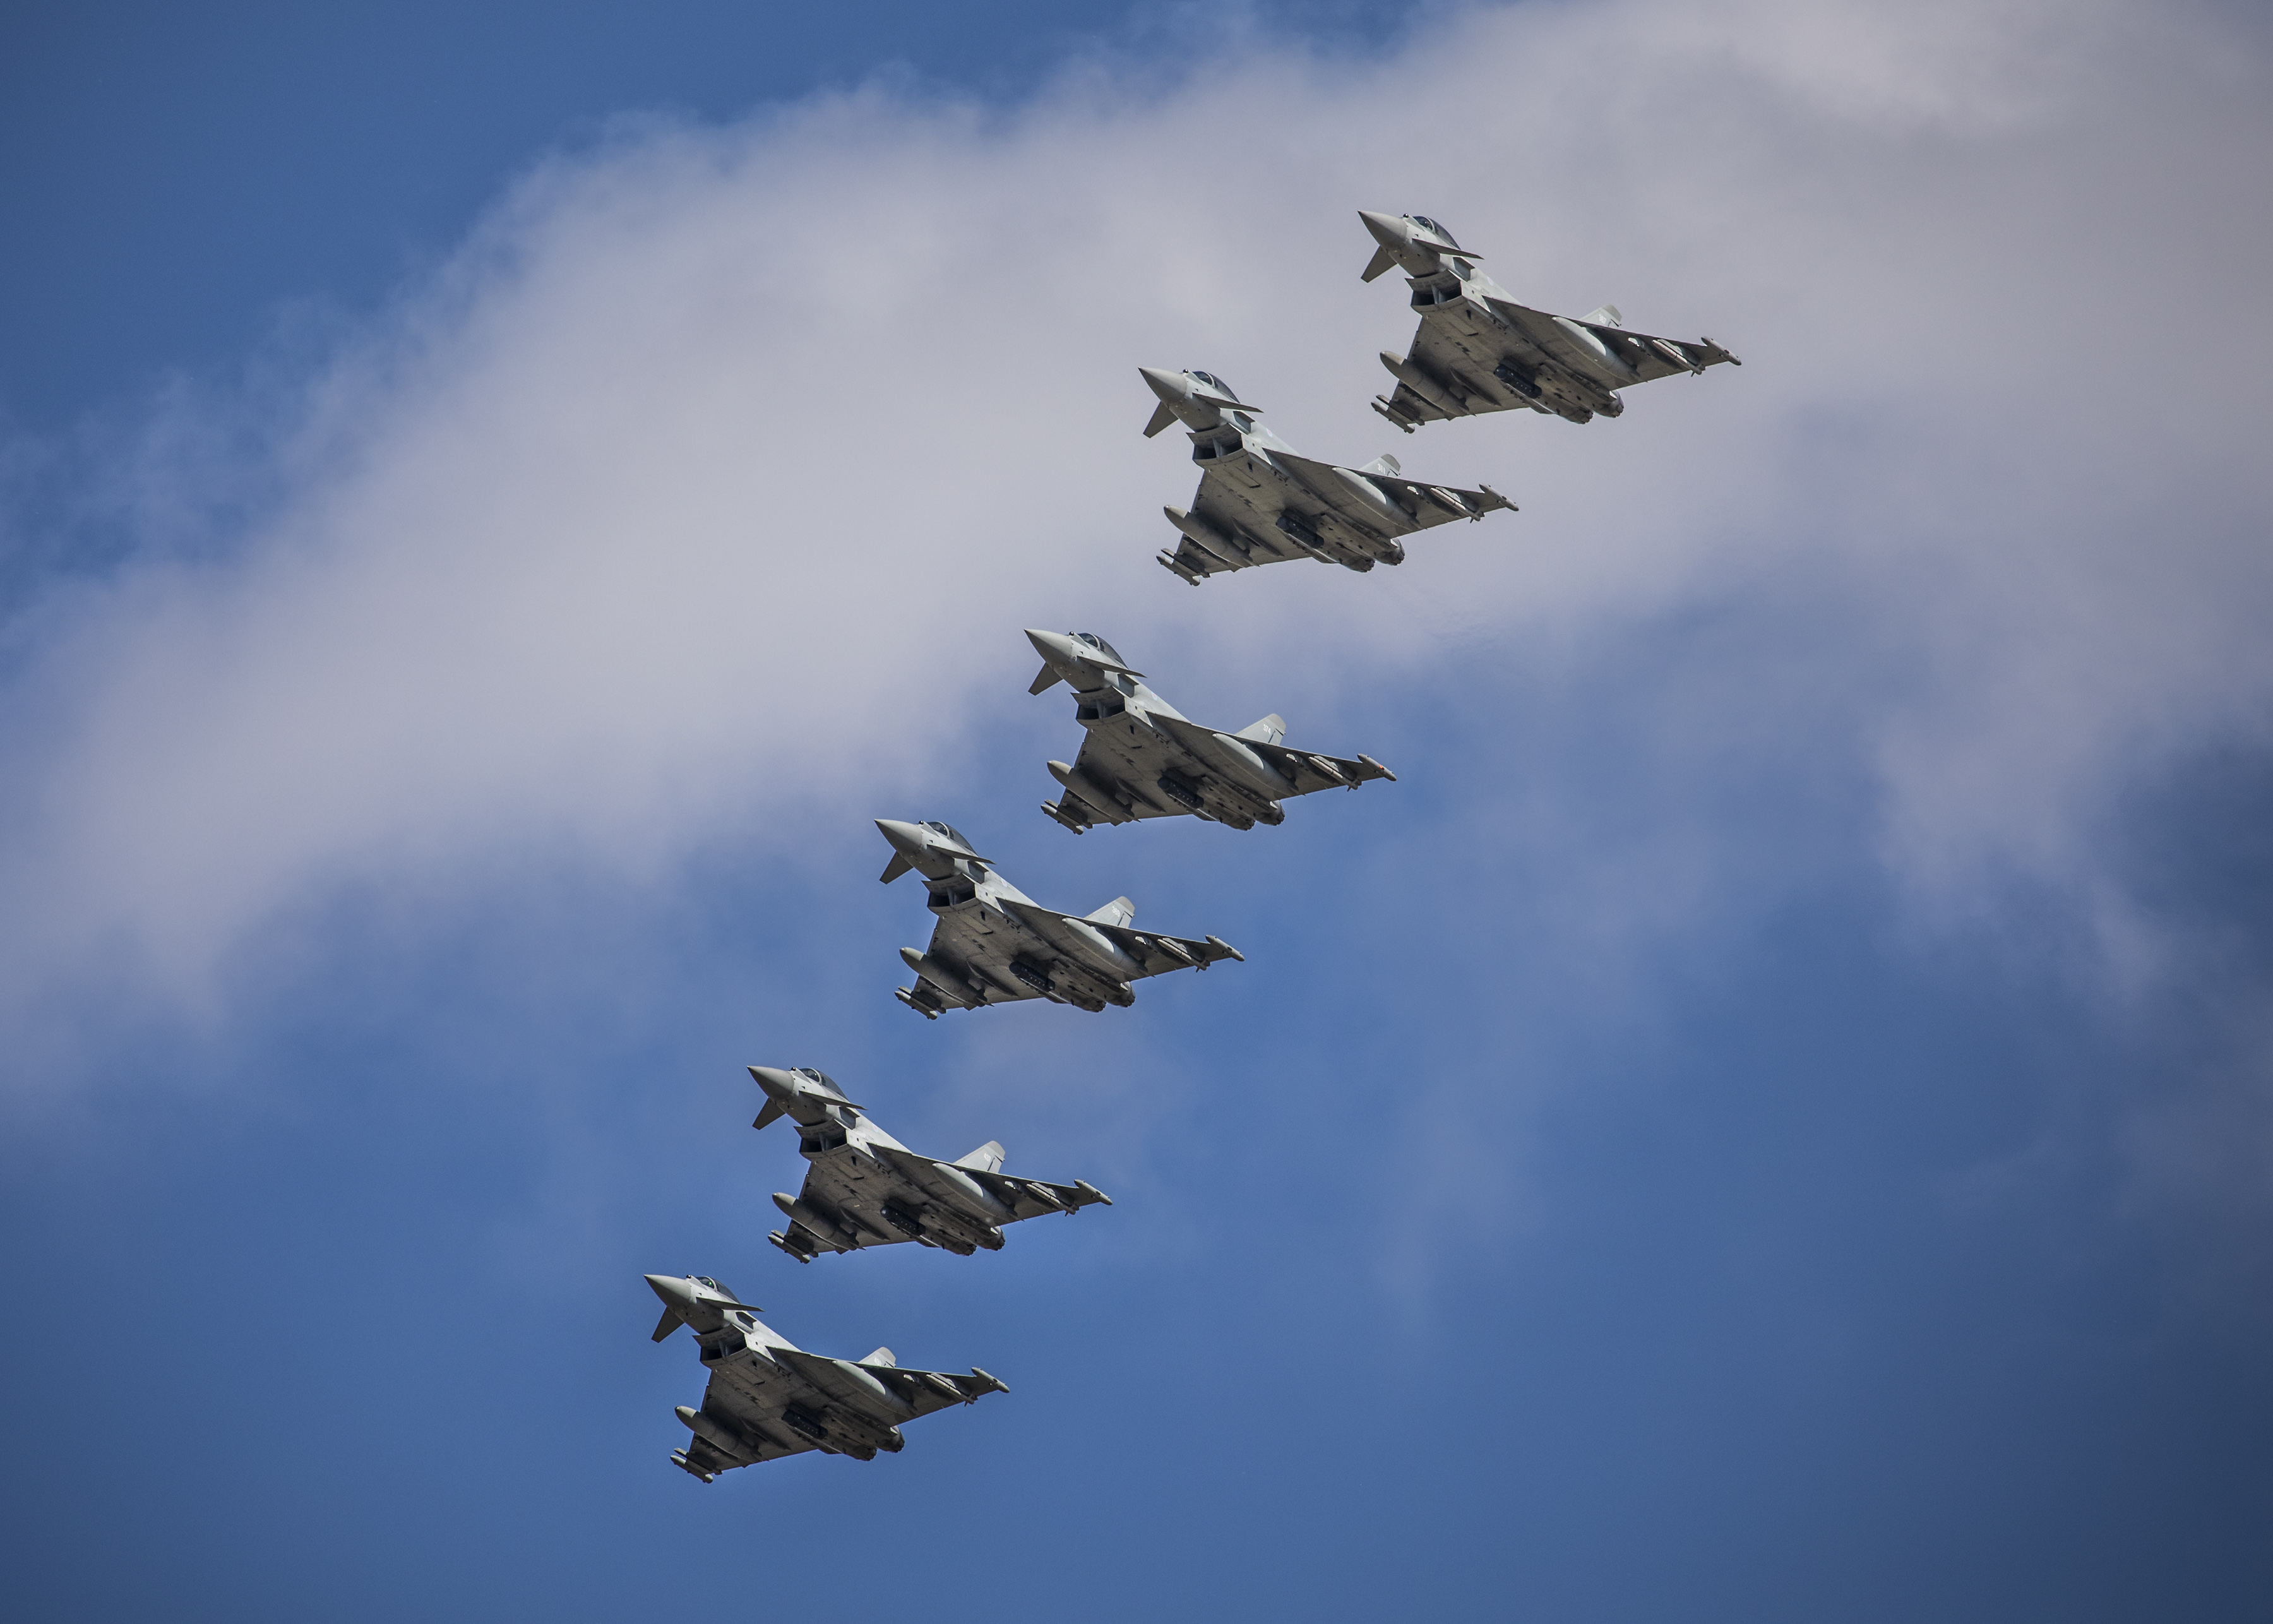 Image shows Typhoons flying in formation.